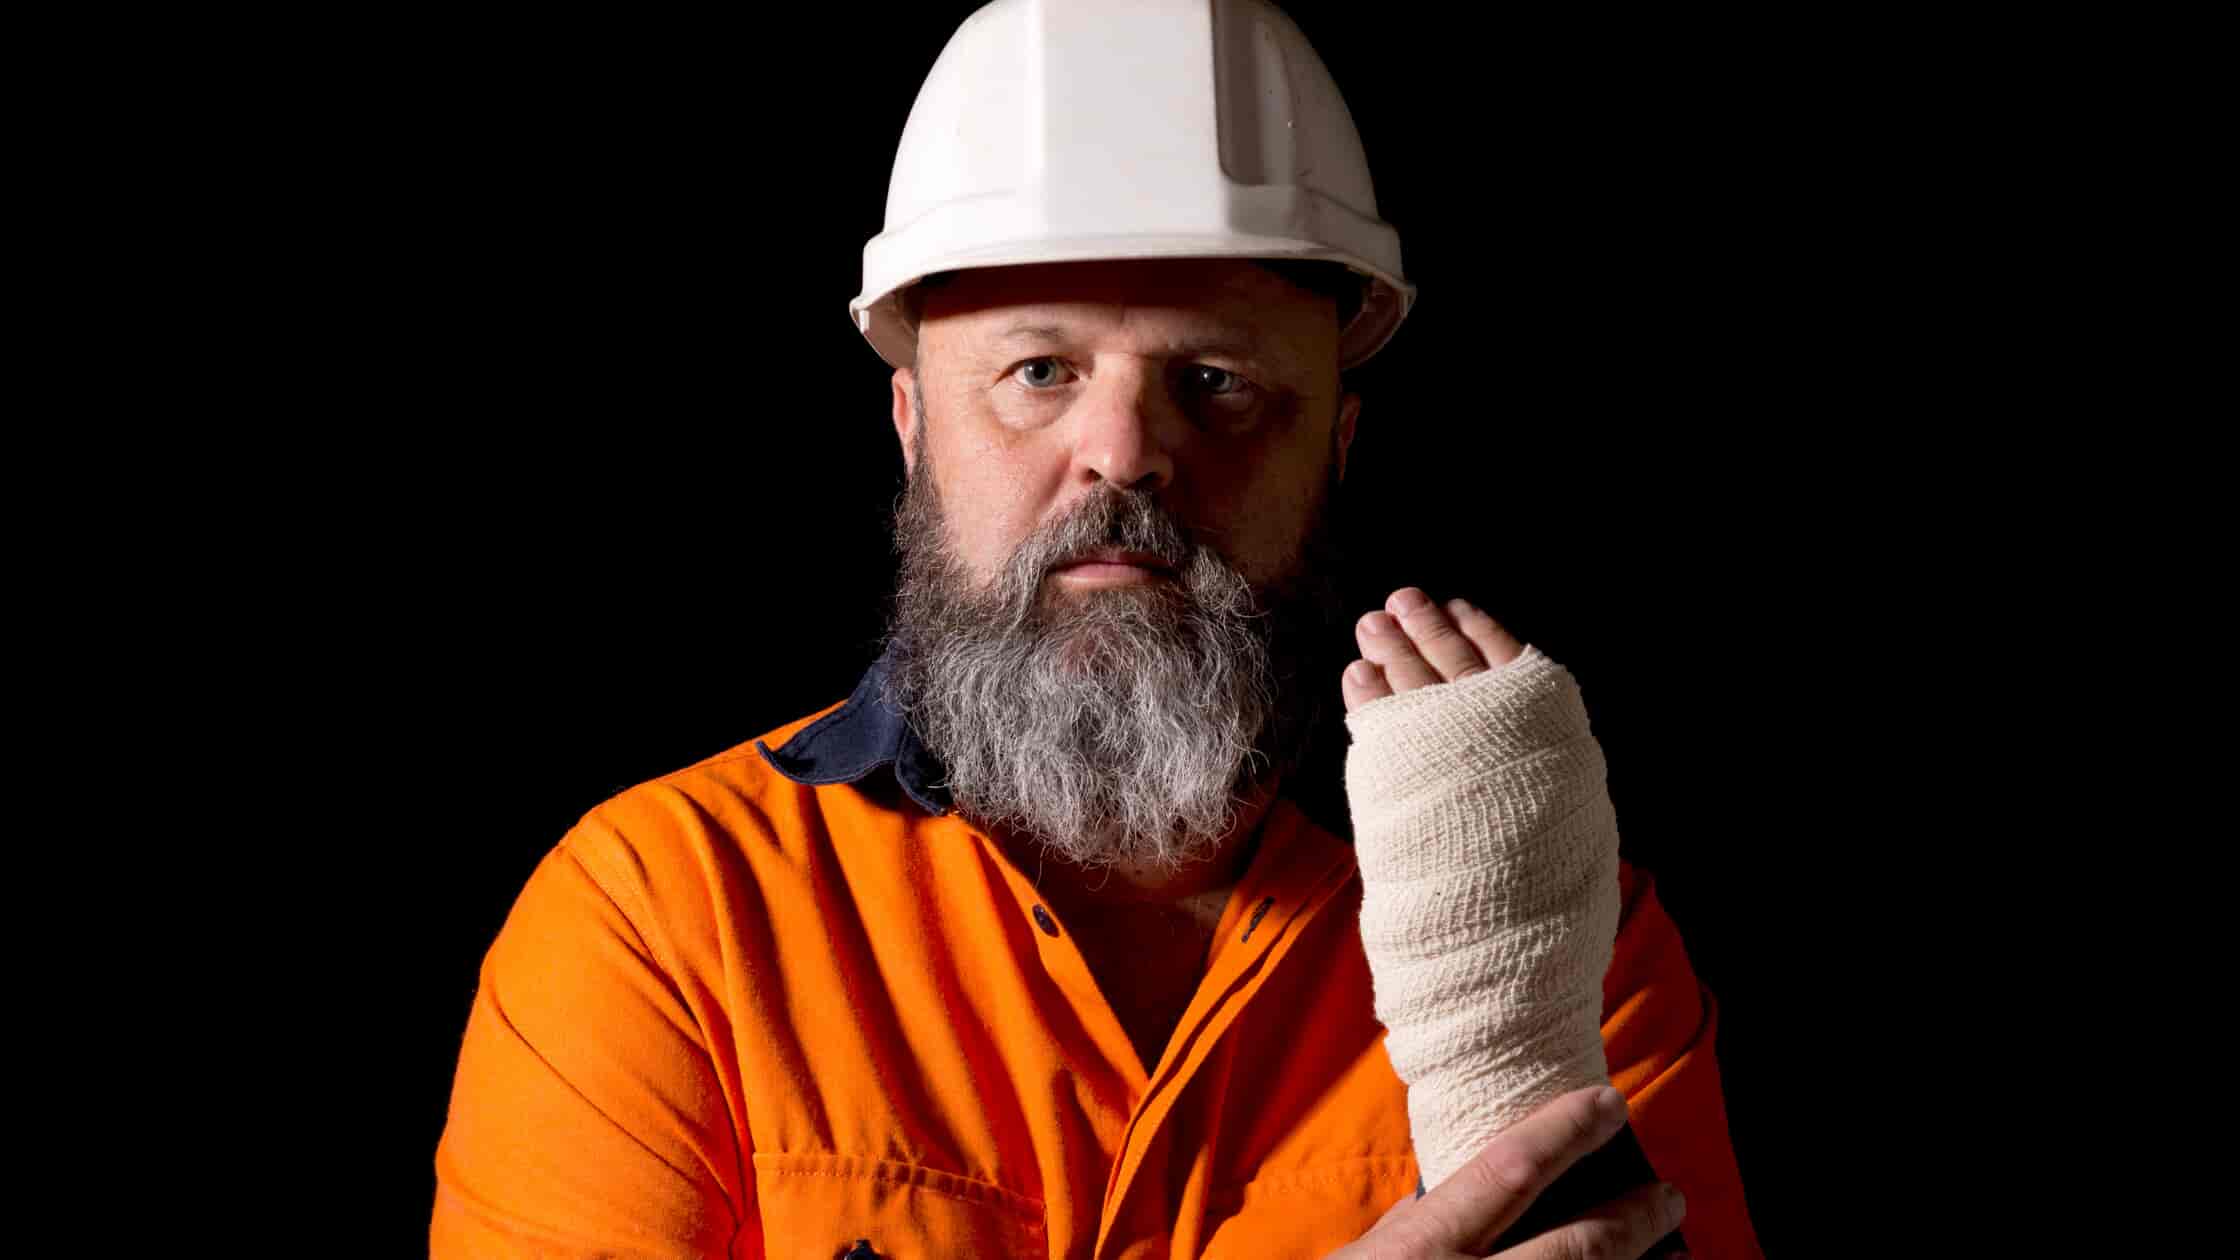 Is Workers’ Compensation Retaliation Illegal?